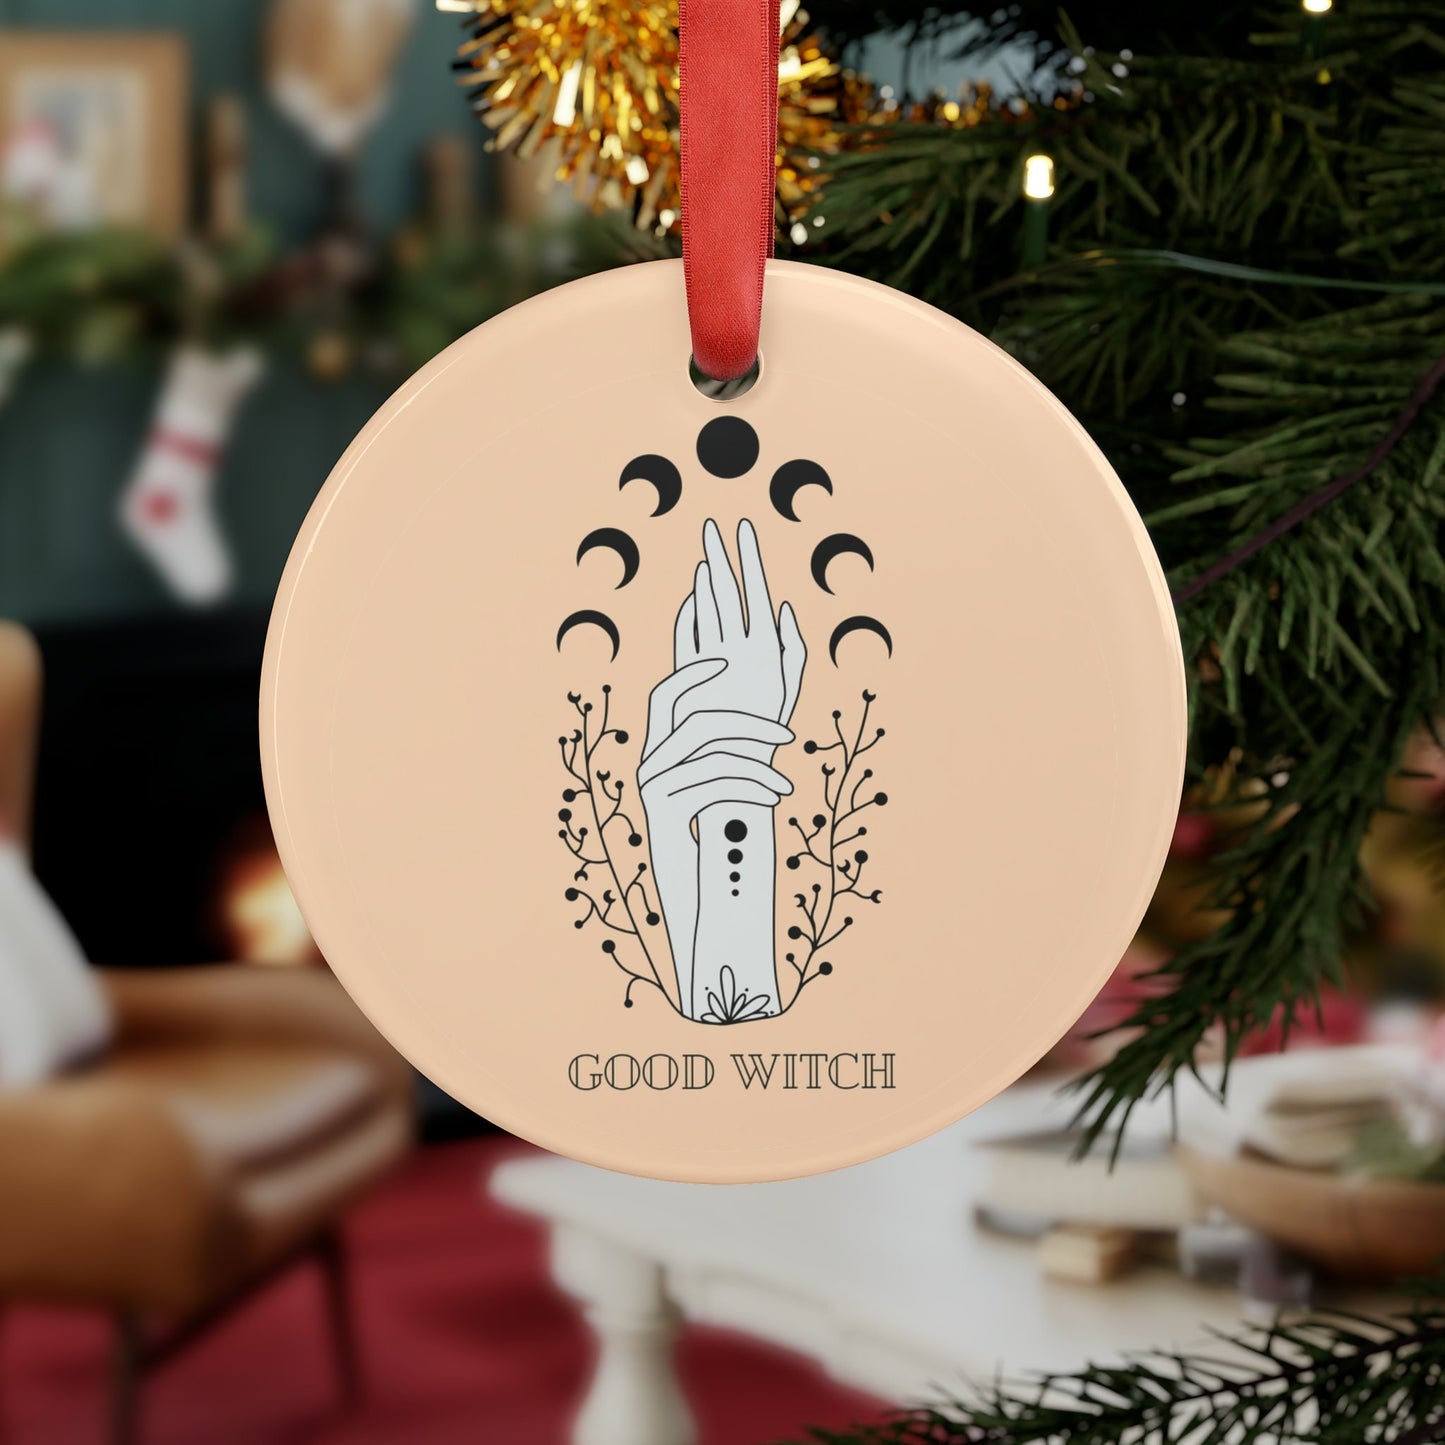 Good Witch Winter Solstice Gift Celestial Star Girl Whimsigoth Cottagecore Moon Phases Witchy Vibes Holiday Xmas Christmas Acrylic Ornament